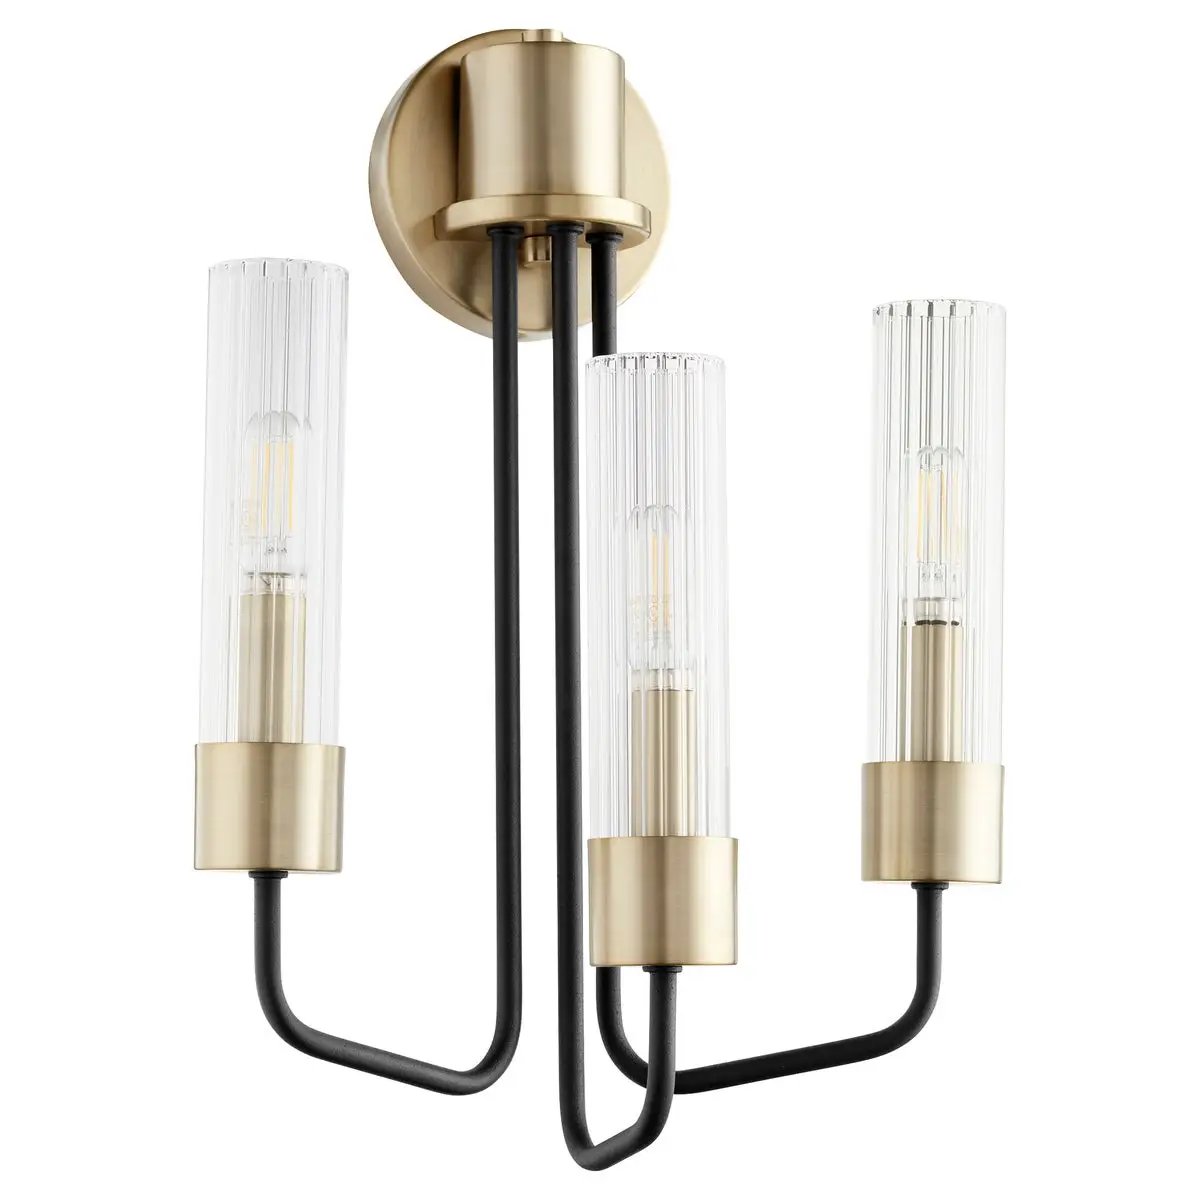 Transitional Wall Sconce with clear glass tubes, aged brass and noir finish. Linear frame with soft-angular curves. Suitable for indoor and outdoor spaces. 12&quot;W x 18&quot;H x 7&quot;E.